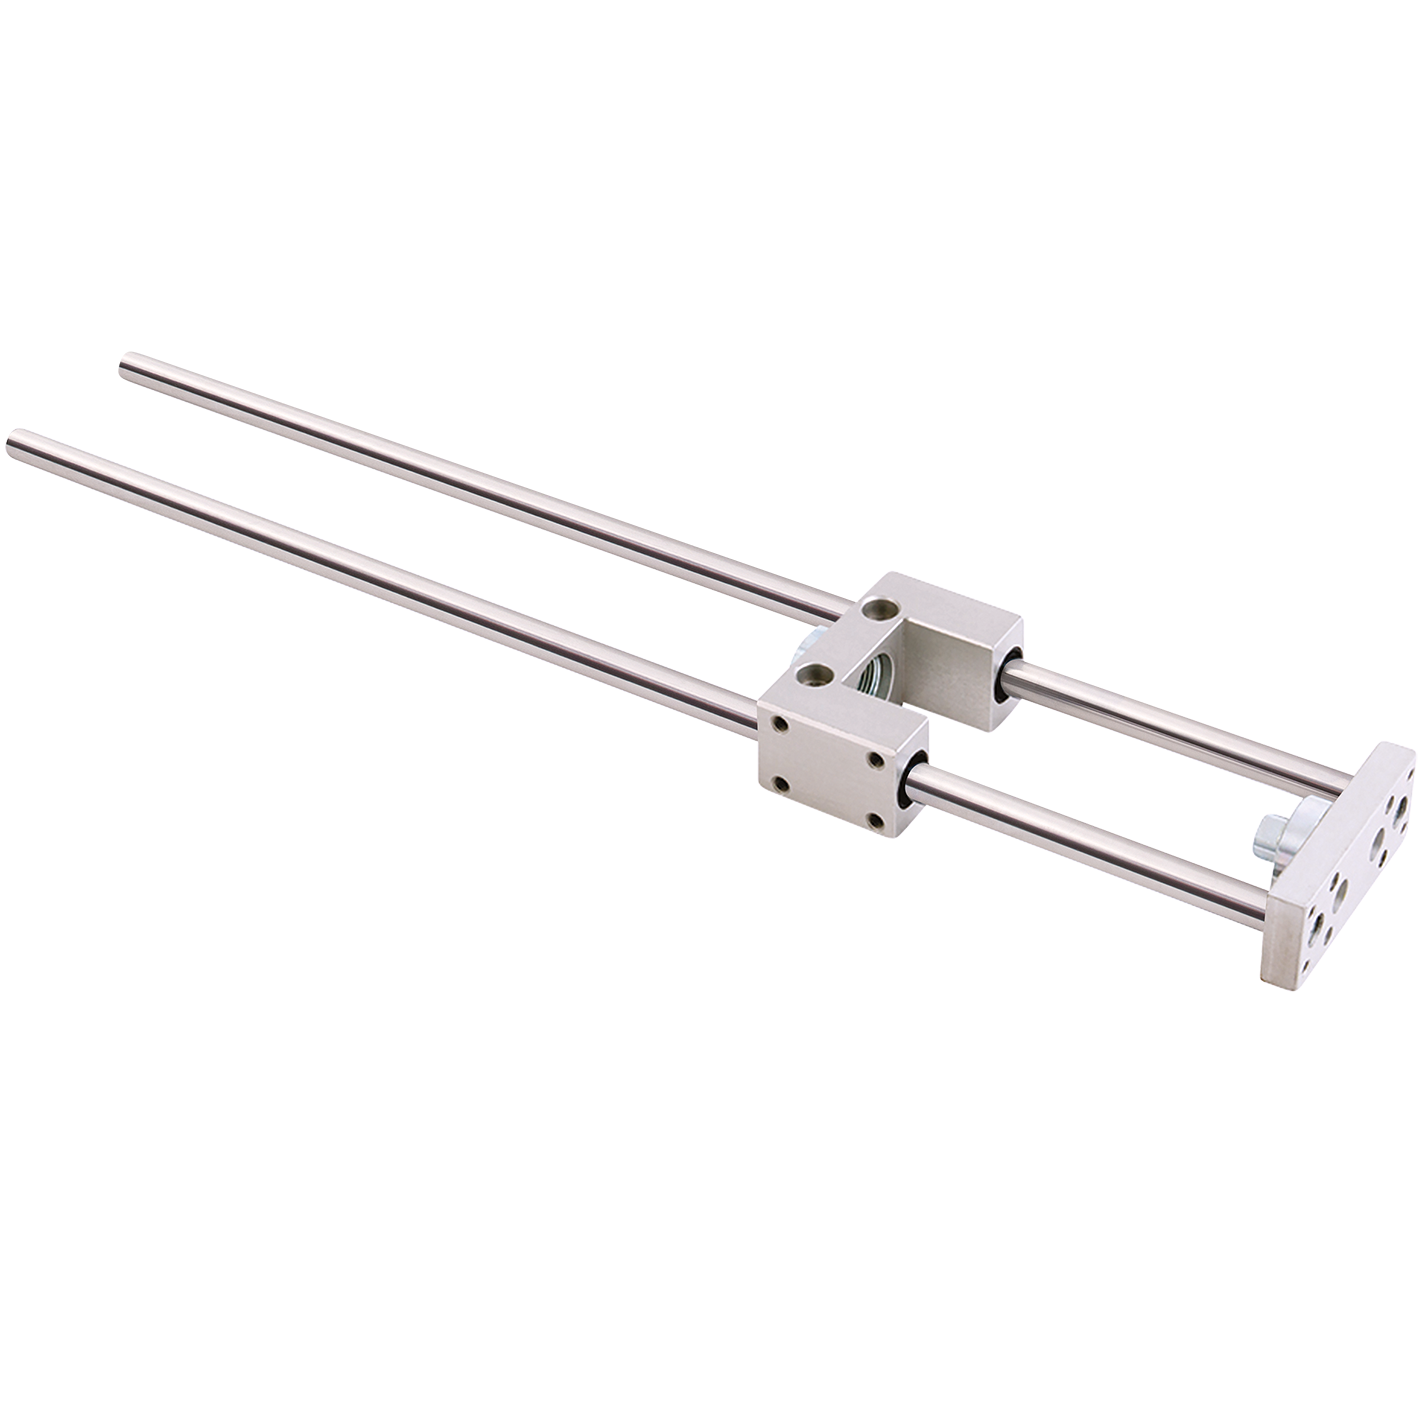 63mm Bore x 250mm Stroke Cylinder Guide Unit